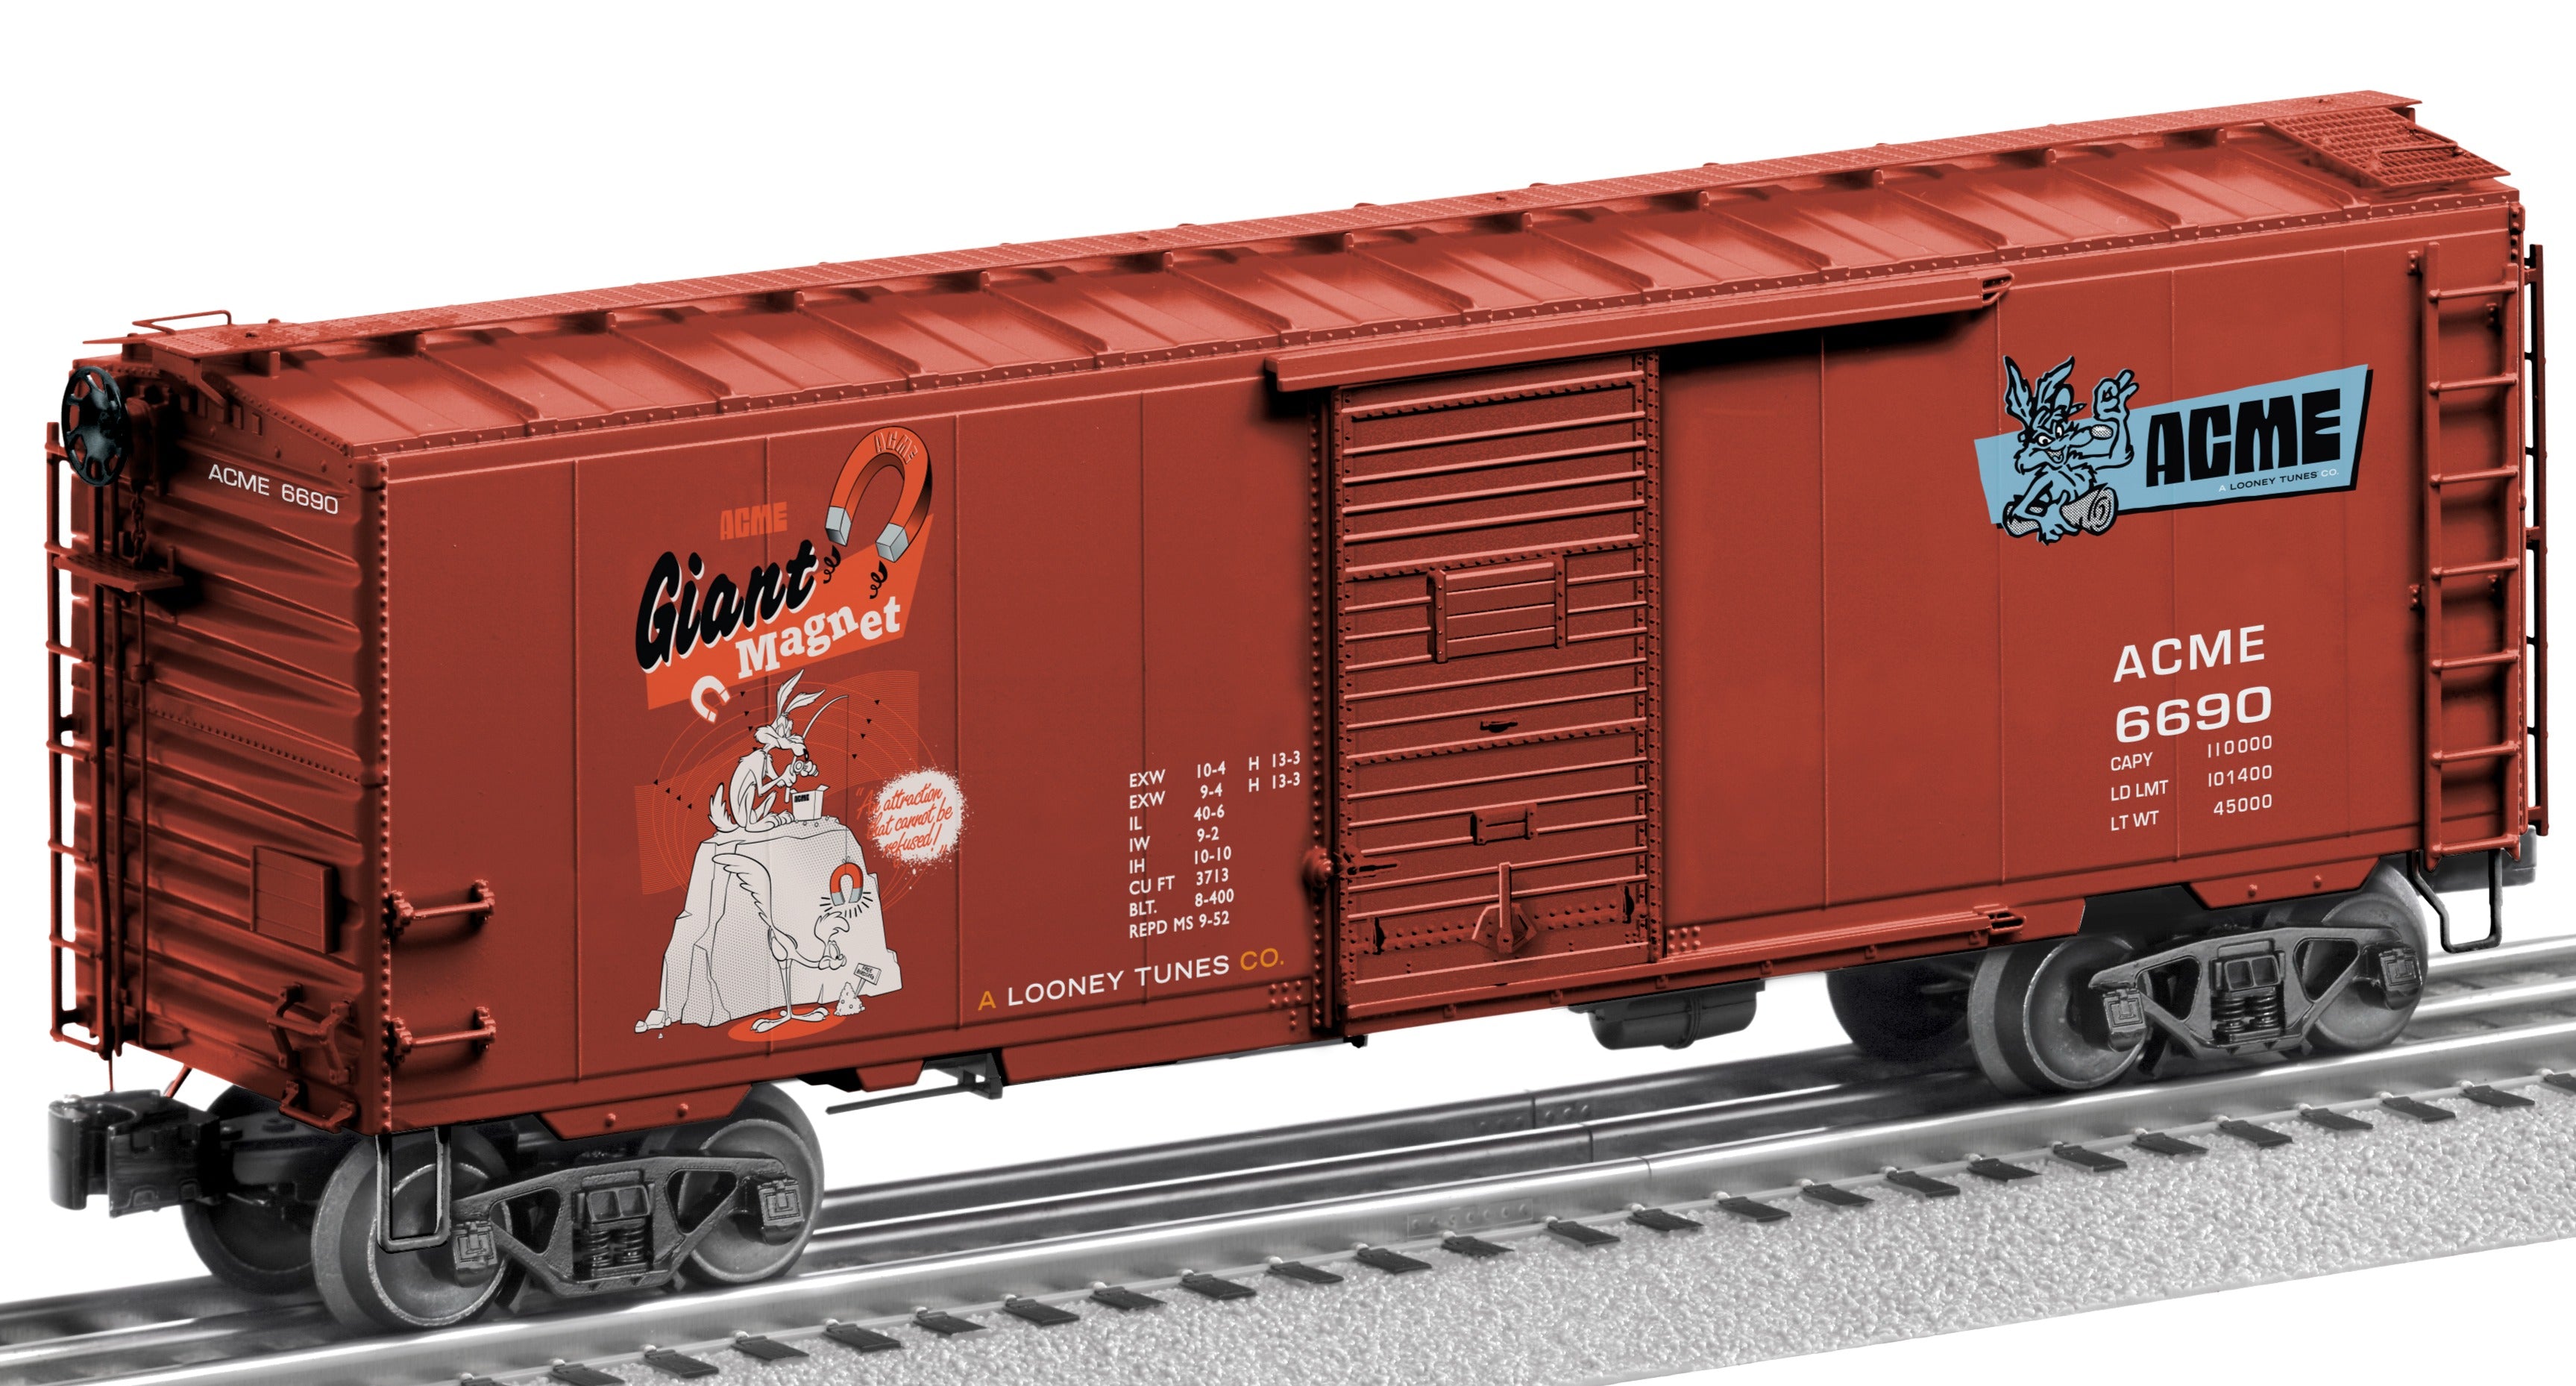 Lionel 2426690 - Looney Tunes - PS-1 Boxcar "ACME" #6690 (Giant Magnet)